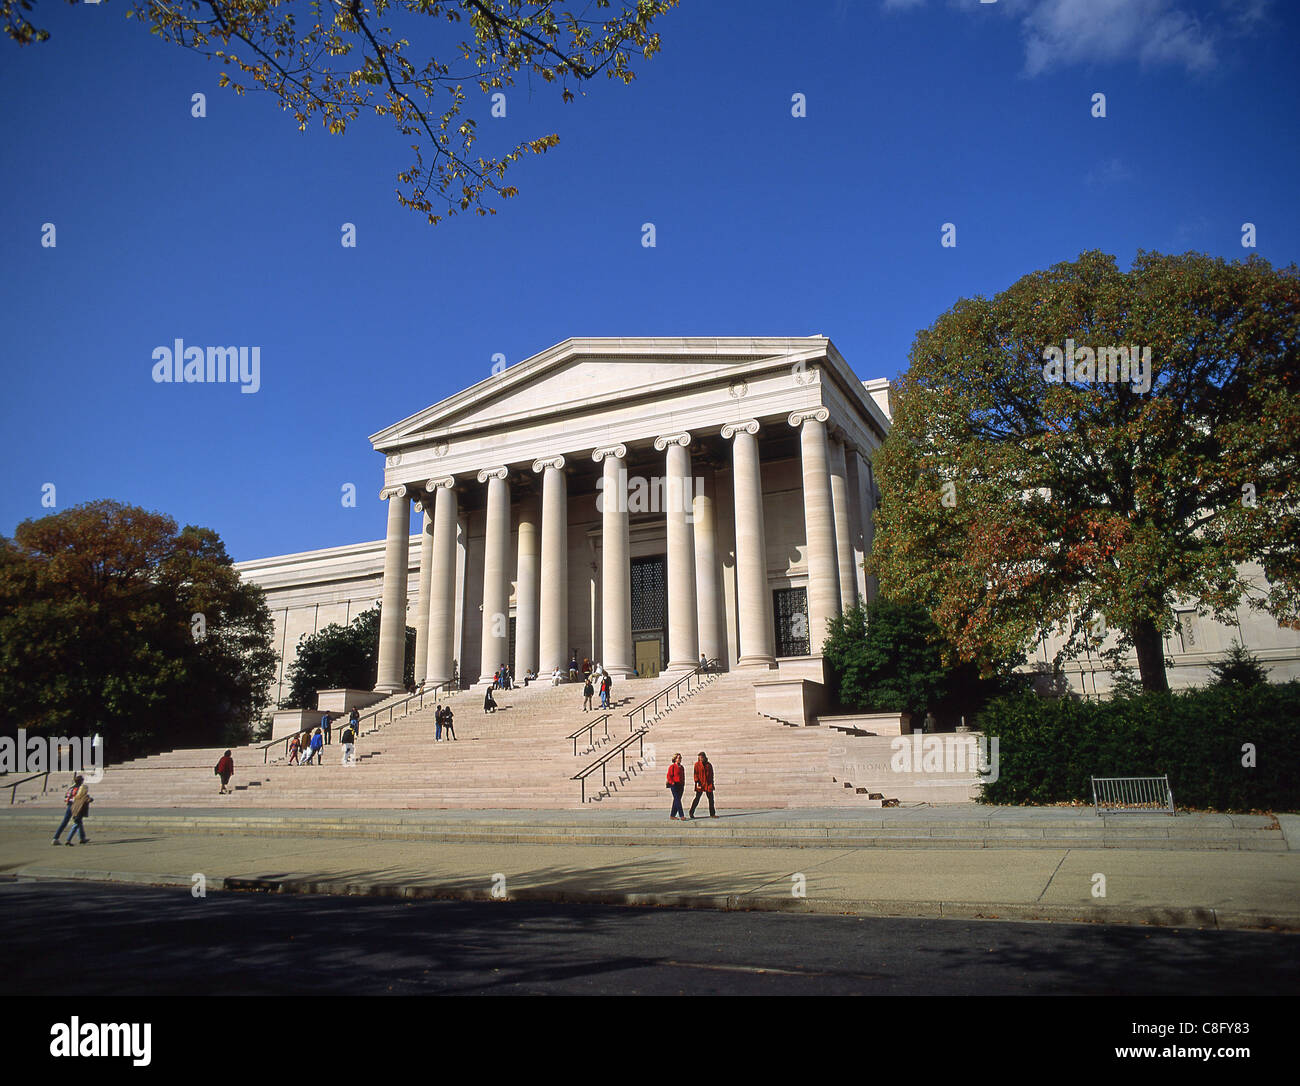 The National Gallery of Art, National Mall, Washington DC, United States of America Stock Photo